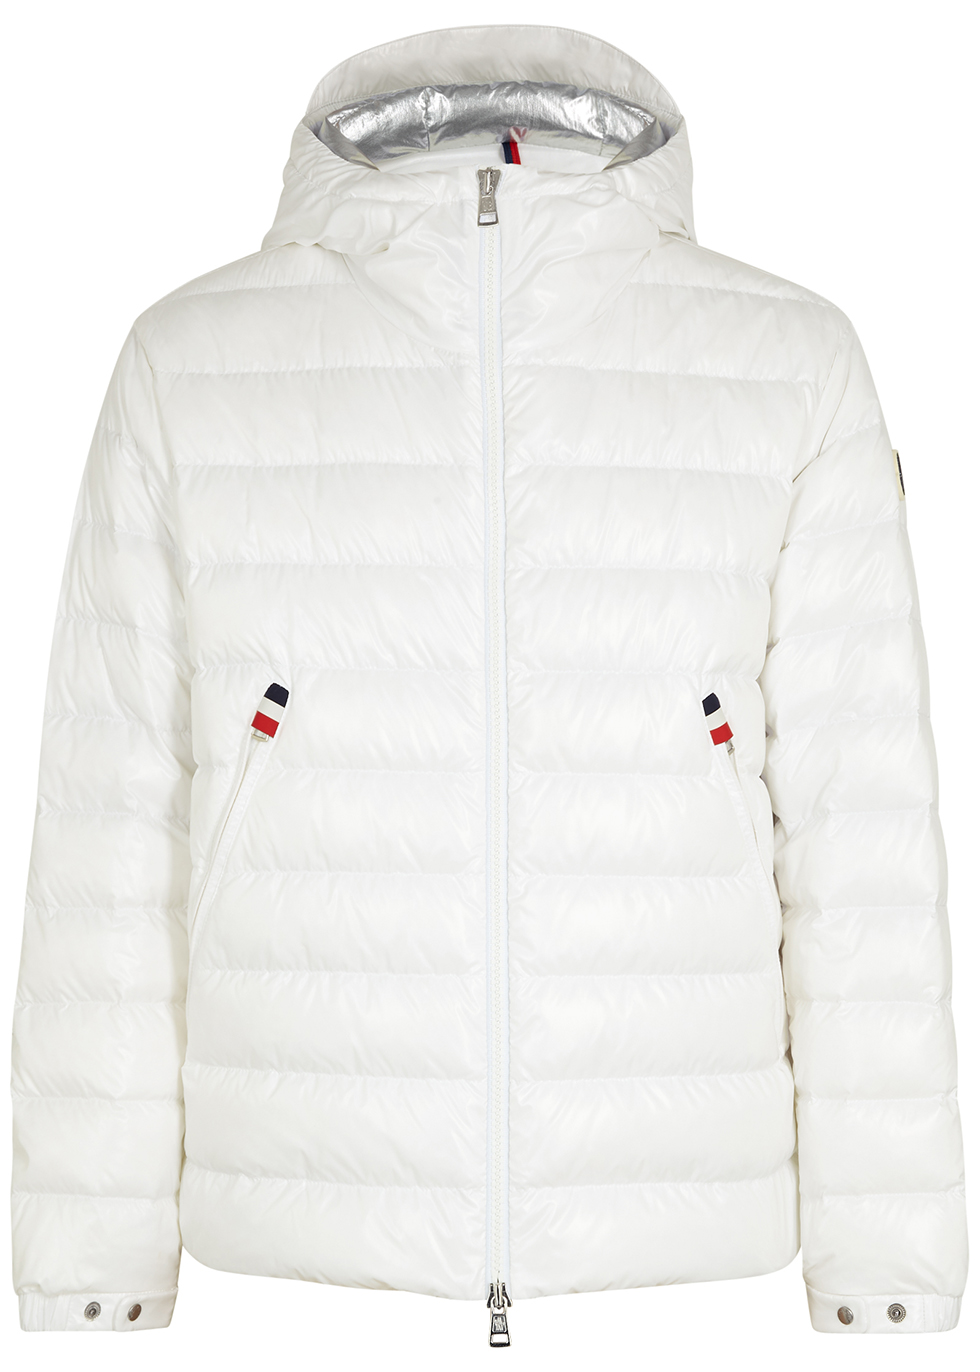 Moncler Blesle white quilted shell jacket - Harvey Nichols